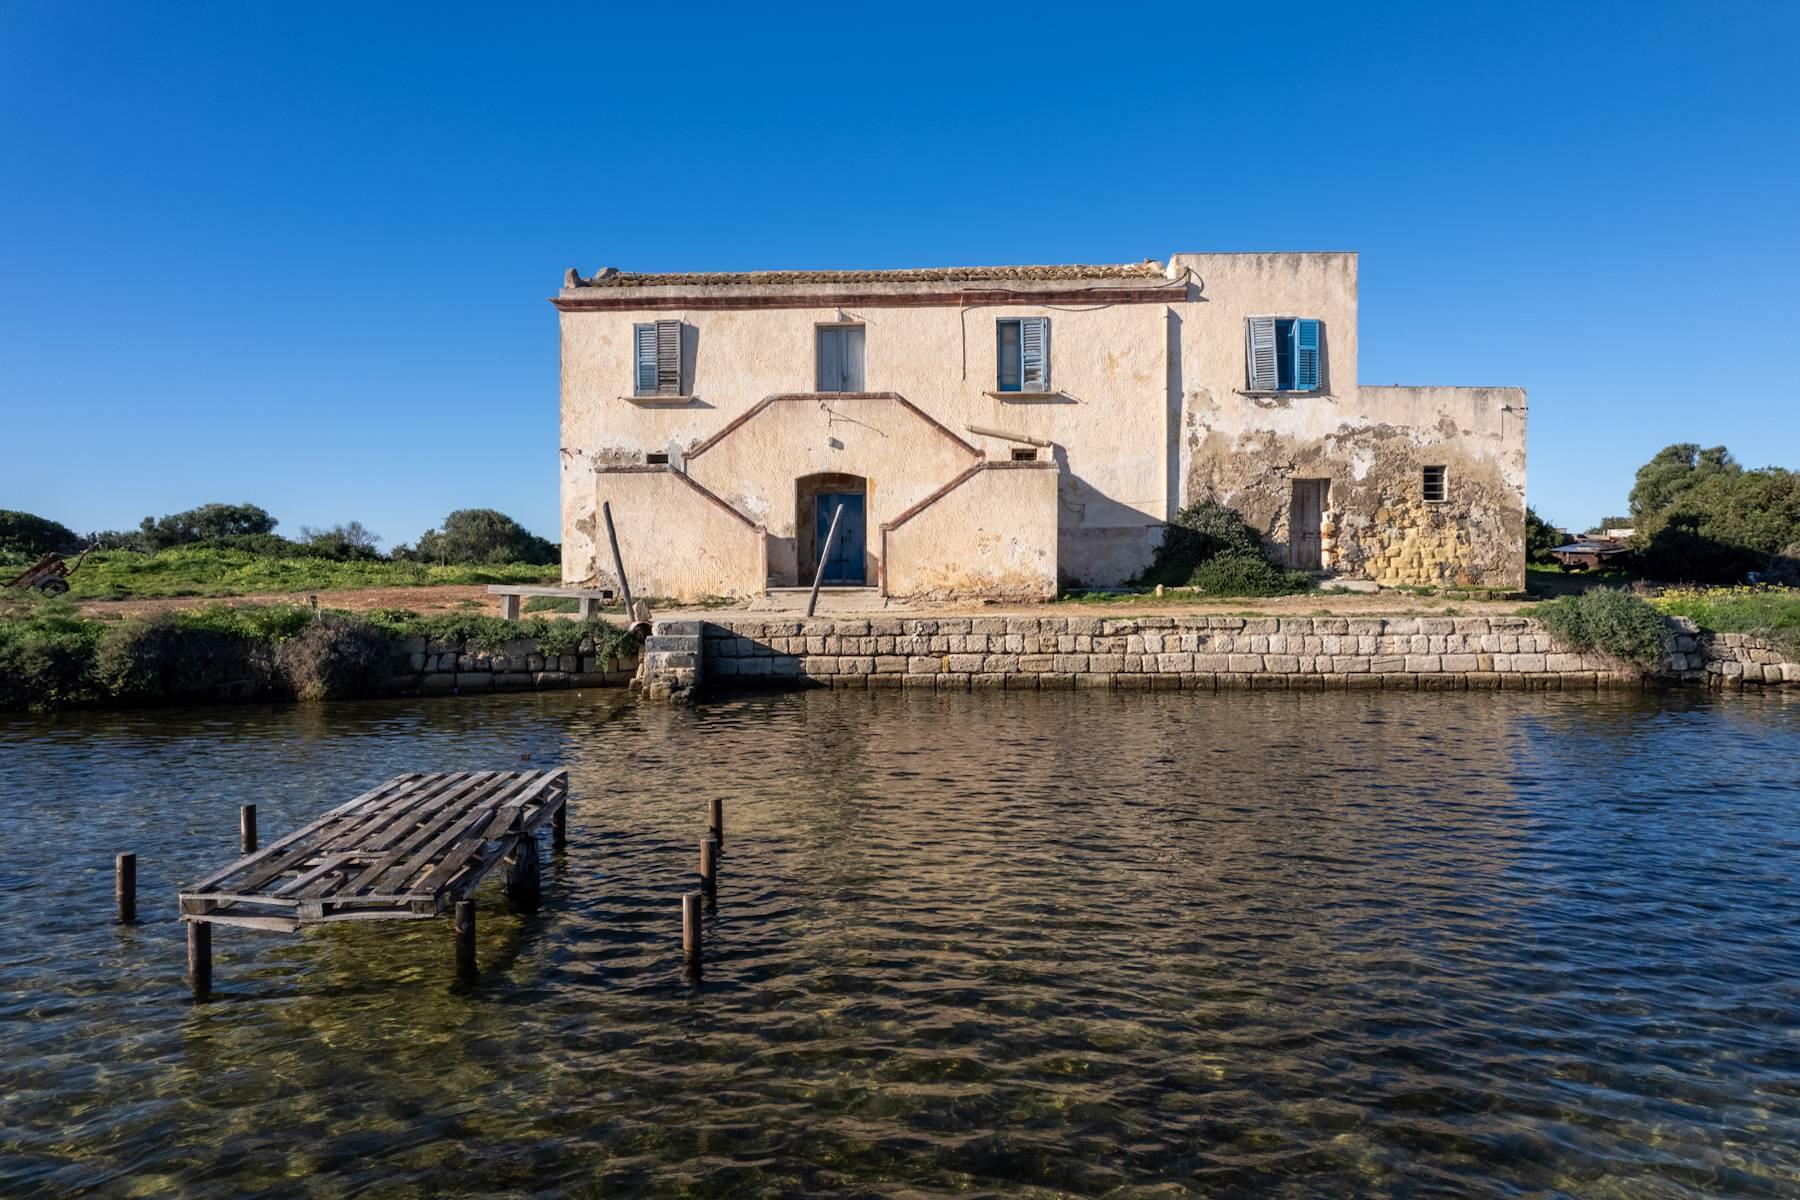 Pied dan s l'eau historic residence on Isola Lunga with private landing stage - 7